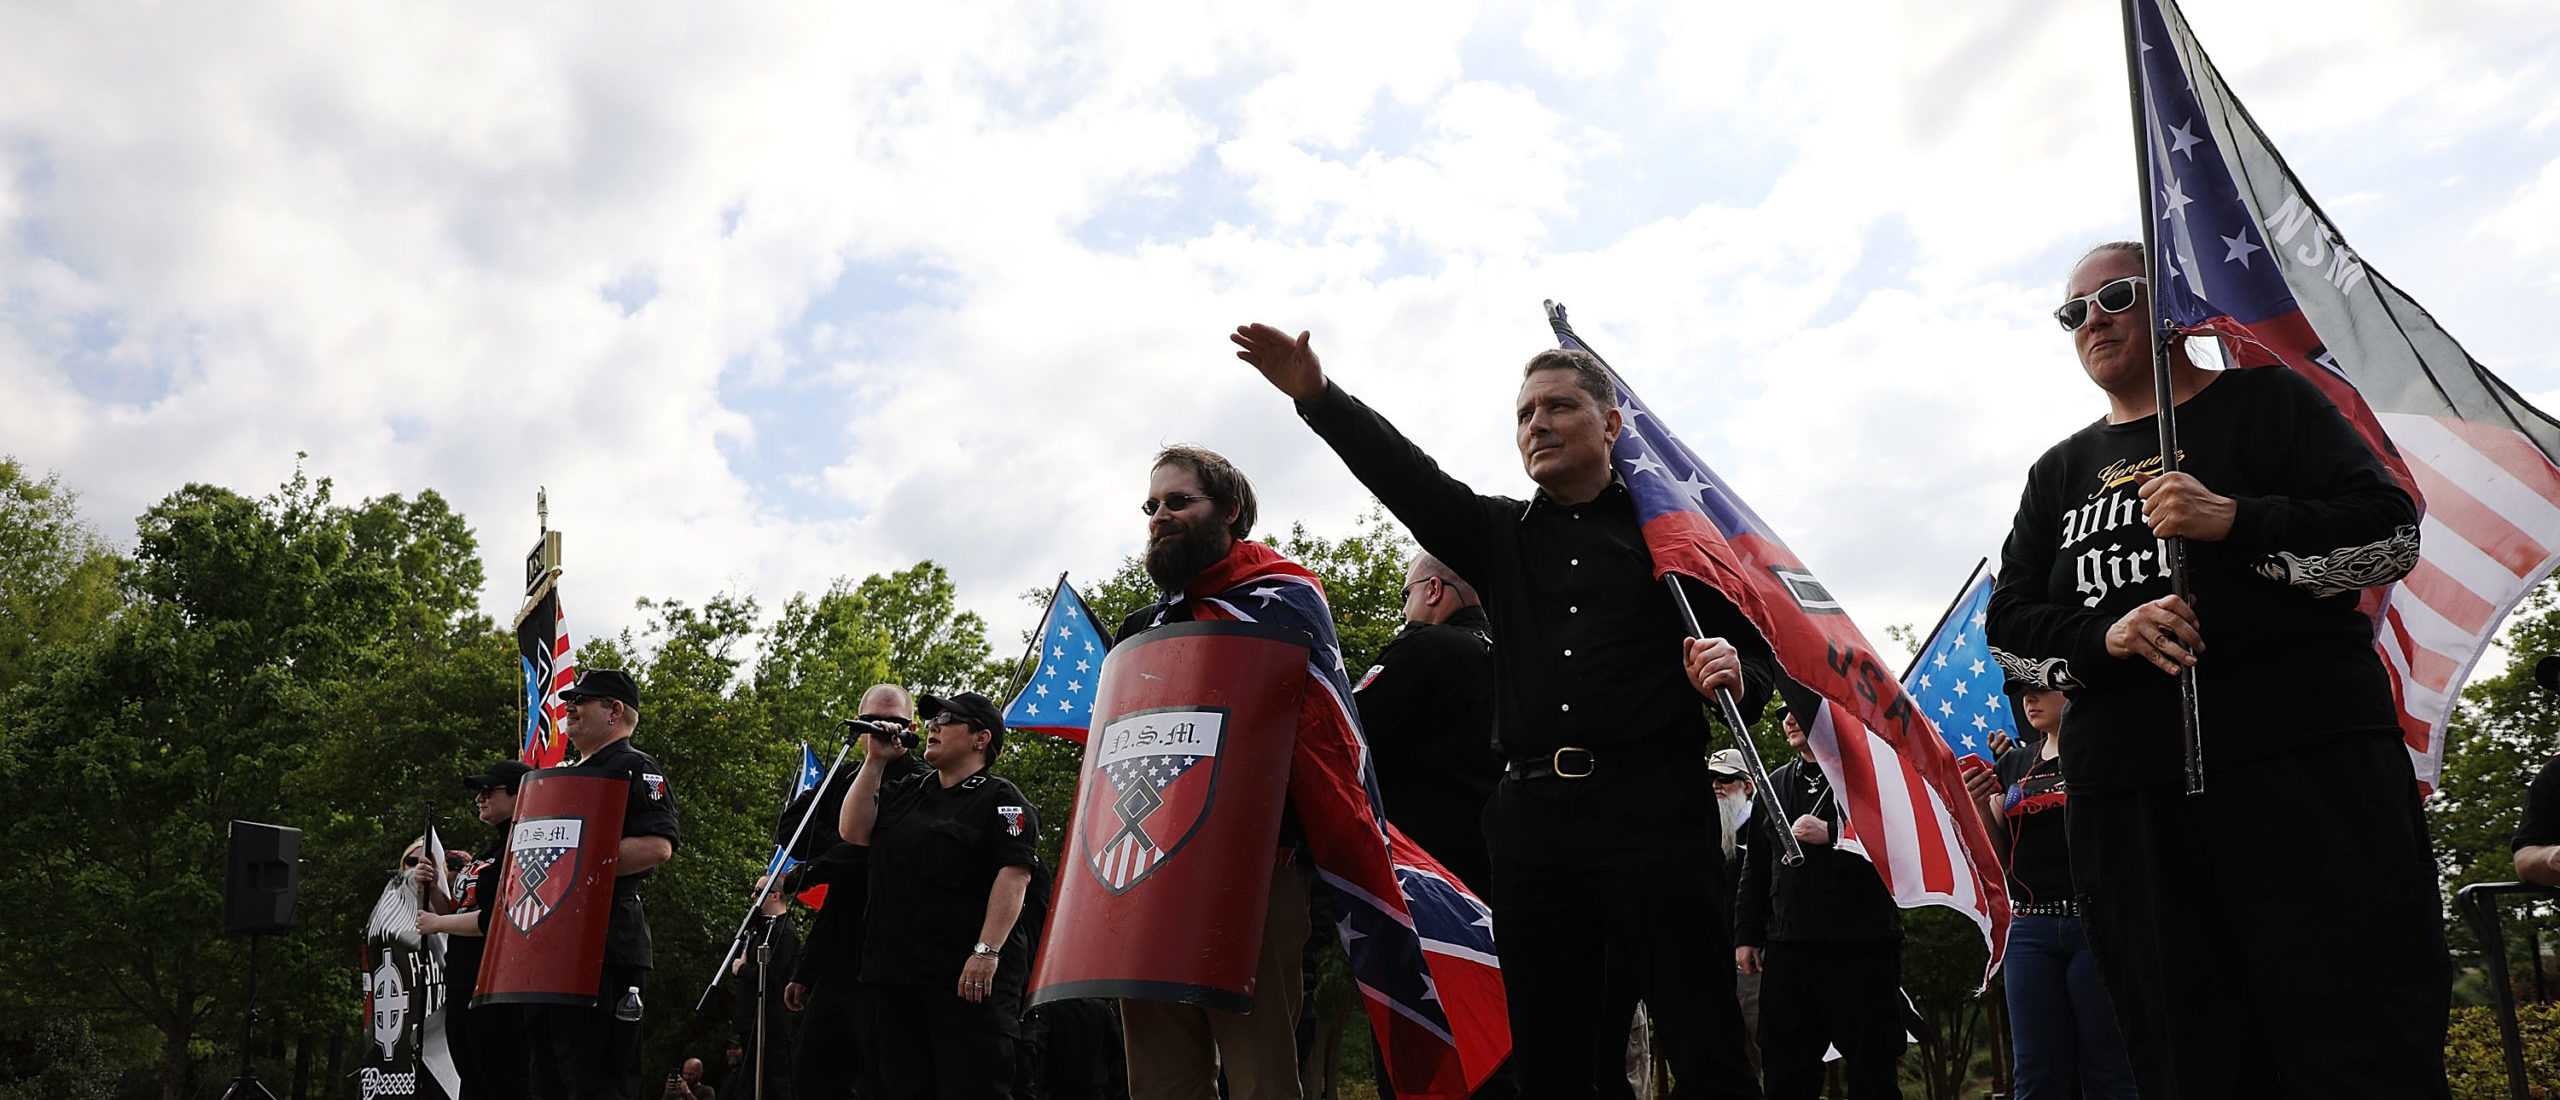 NEWNAN, GA - APRIL 21: Members and supporters of the National Socialist Movement, one of the largest neo-Nazi groups in the US, hold a rally on April 21, 2018 in Newnan, Georgia. Community members have opposed the rally and have come out to embrace racial unity in the small Georgia town. Fearing a repeat of the violence that broke out after Charlottesville, hundreds of police officers are stationed in the town during the rally in an attempt to keep the anti racist protesters and neo-Nazi groups separated. (Photo by Spencer Platt/Getty Images)